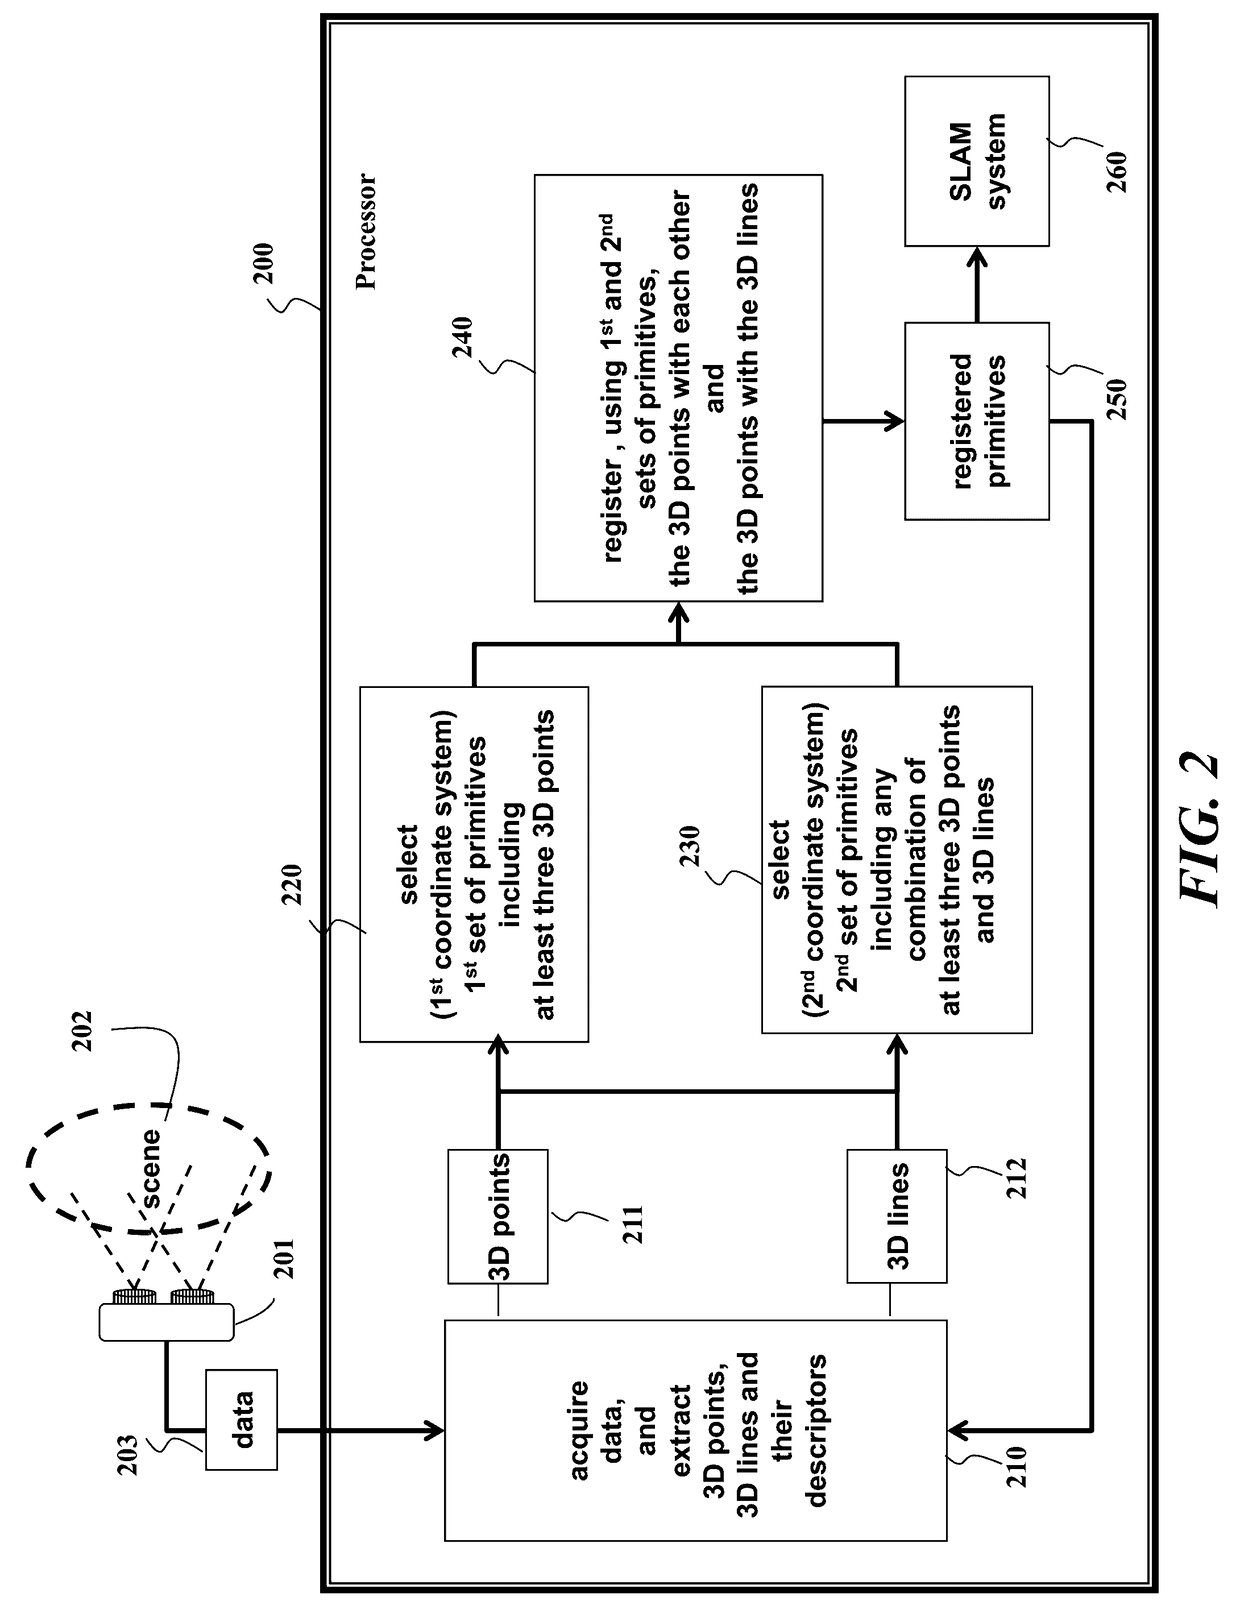 System and Method for Hybrid Simultaneous Localization and Mapping of 2D and 3D Data Acquired by Sensors from a 3D Scene